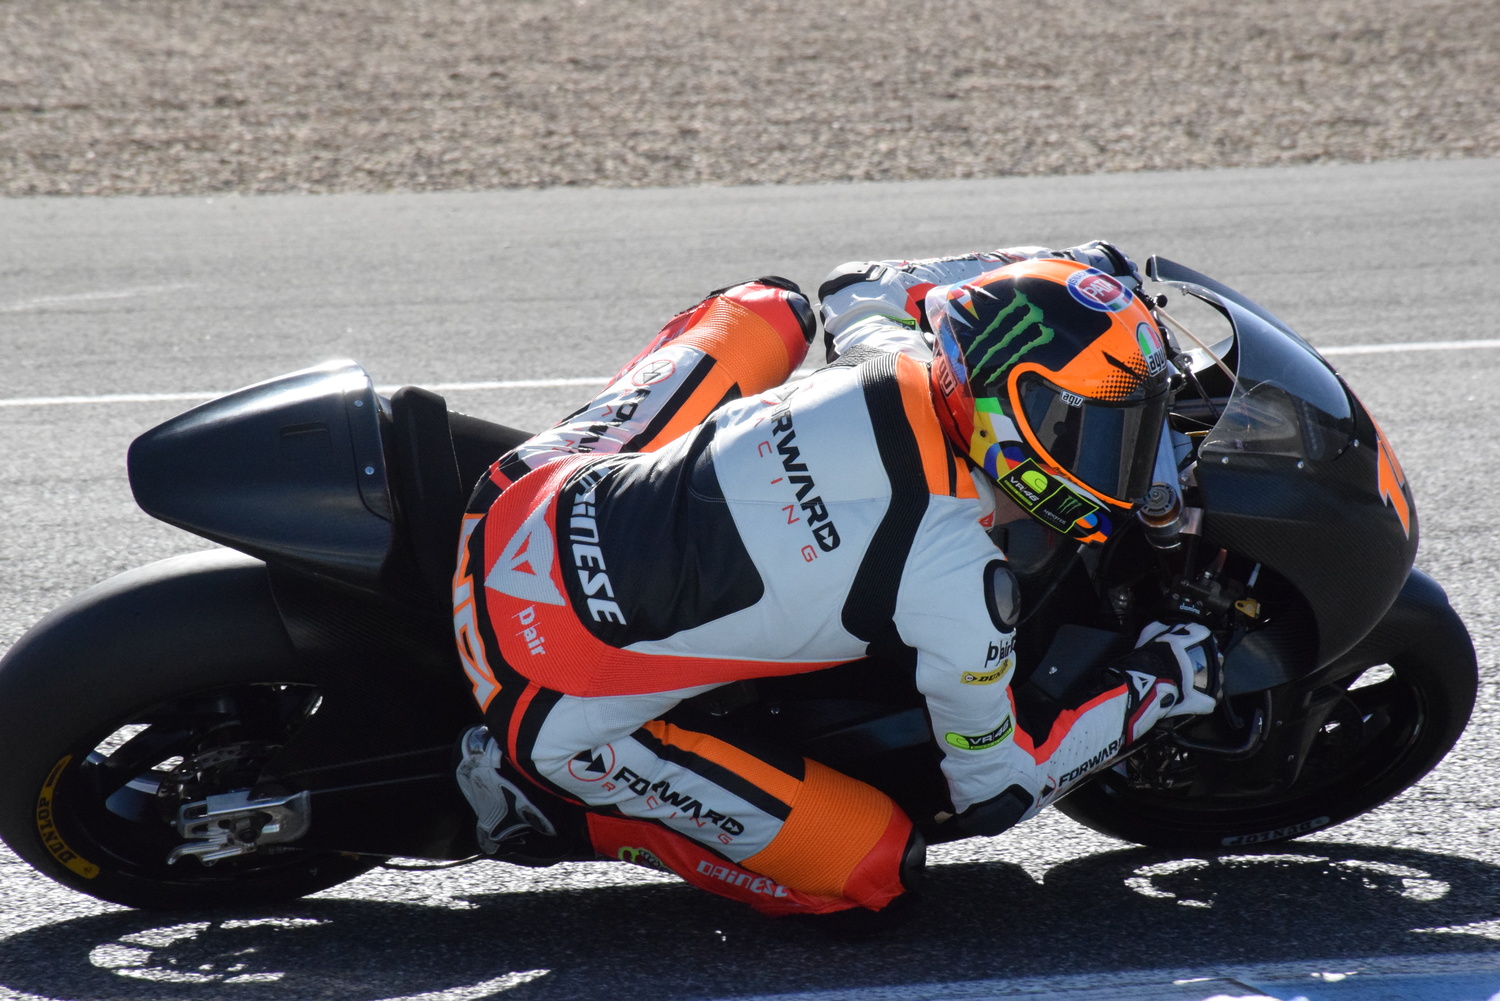 Good results in Jerez for Forward Racing